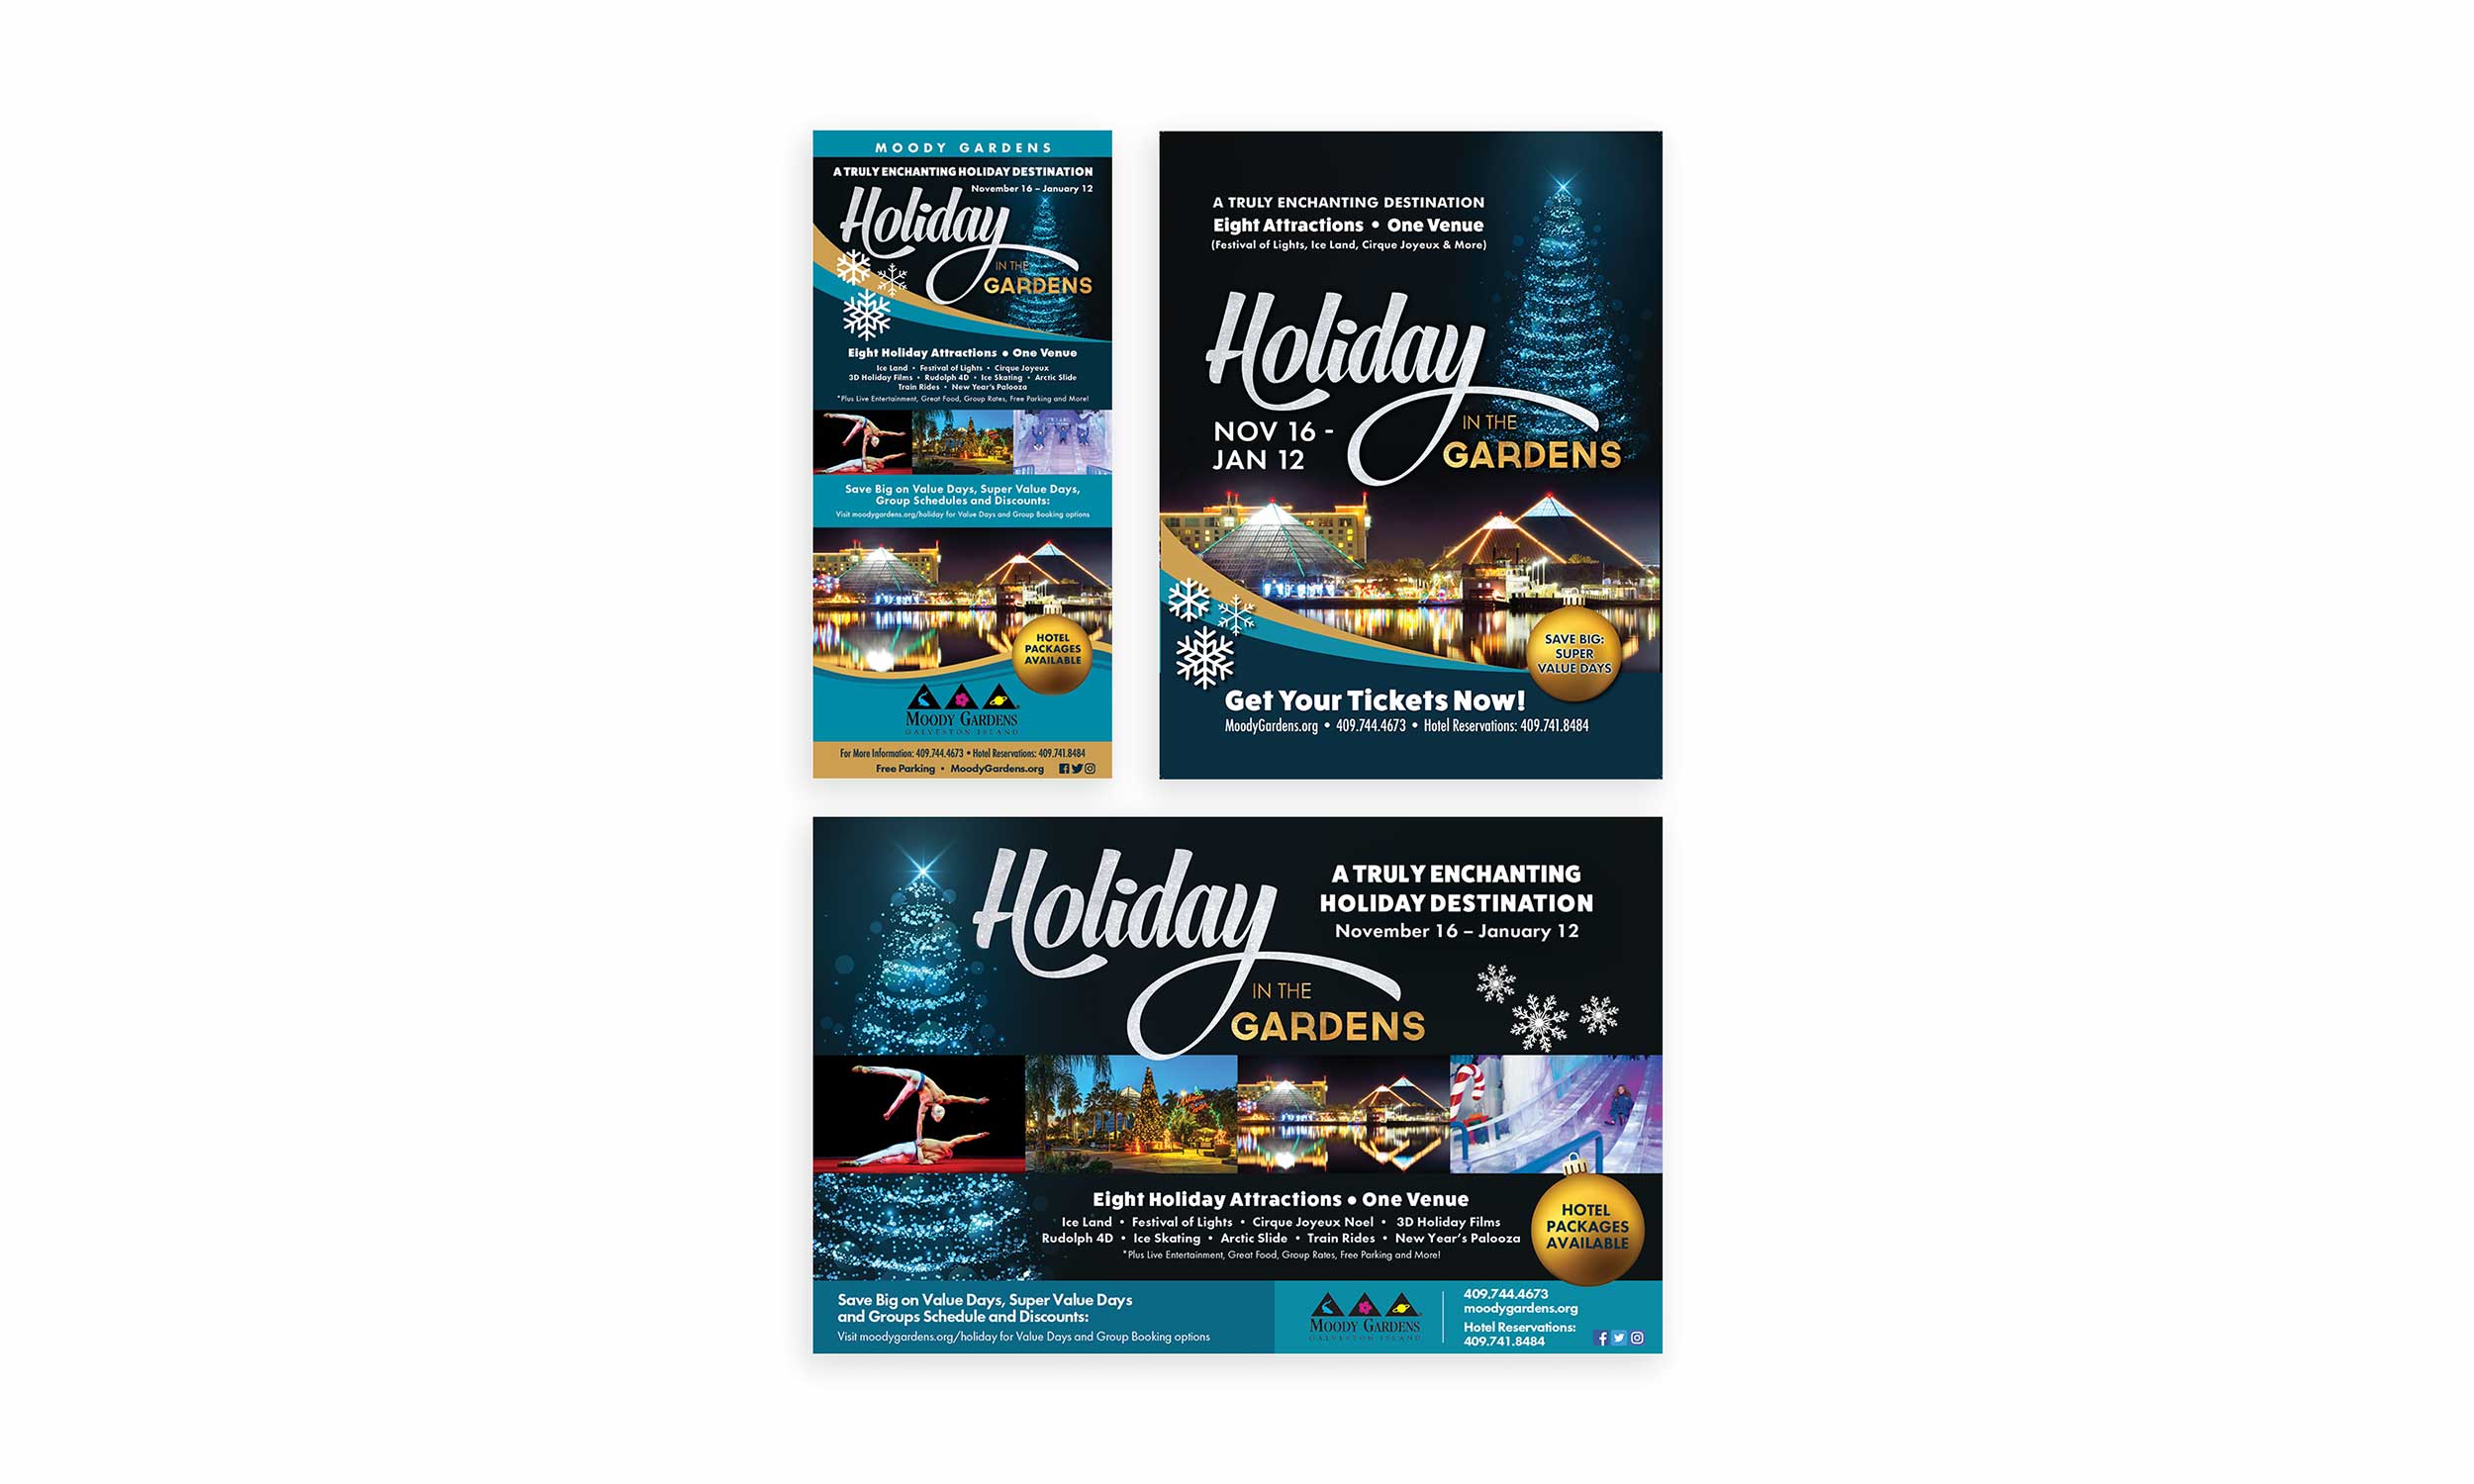 Flyers and Brochures for Moody Gardens, Holiday in the Gardens Events